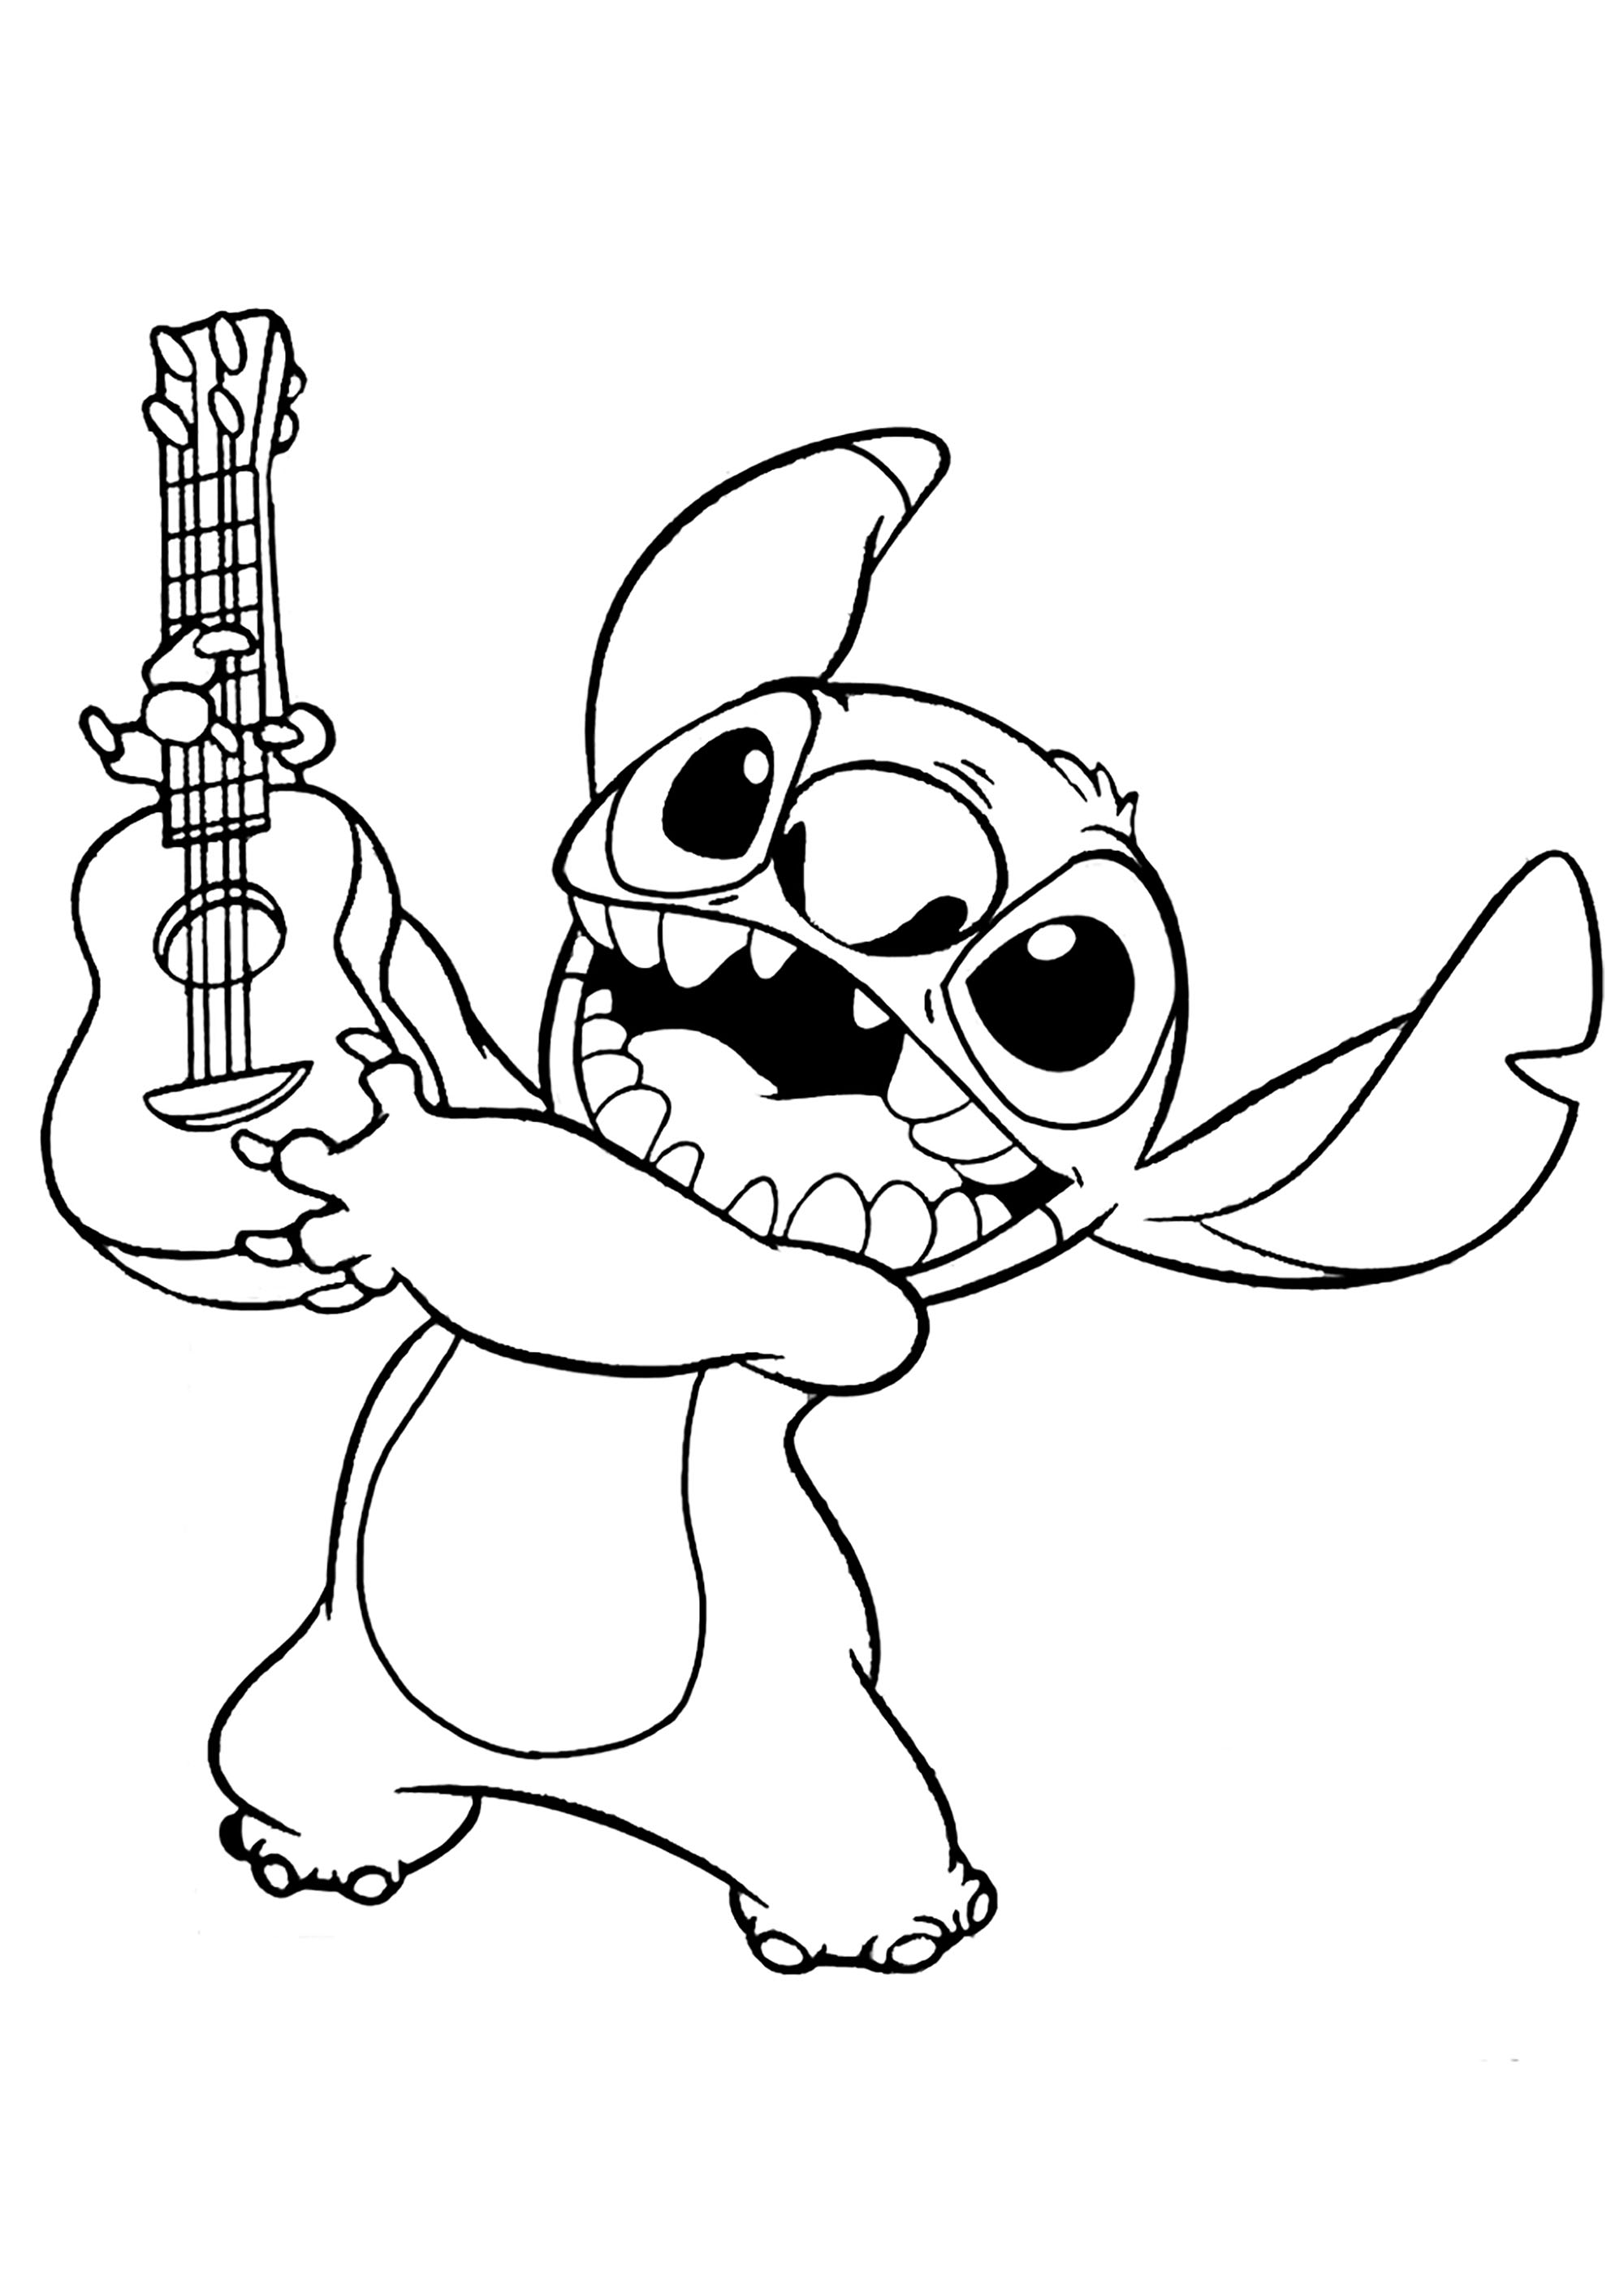 Lilo and Stitch coloring pages to print for free - Lilo and Stitch Kids ...